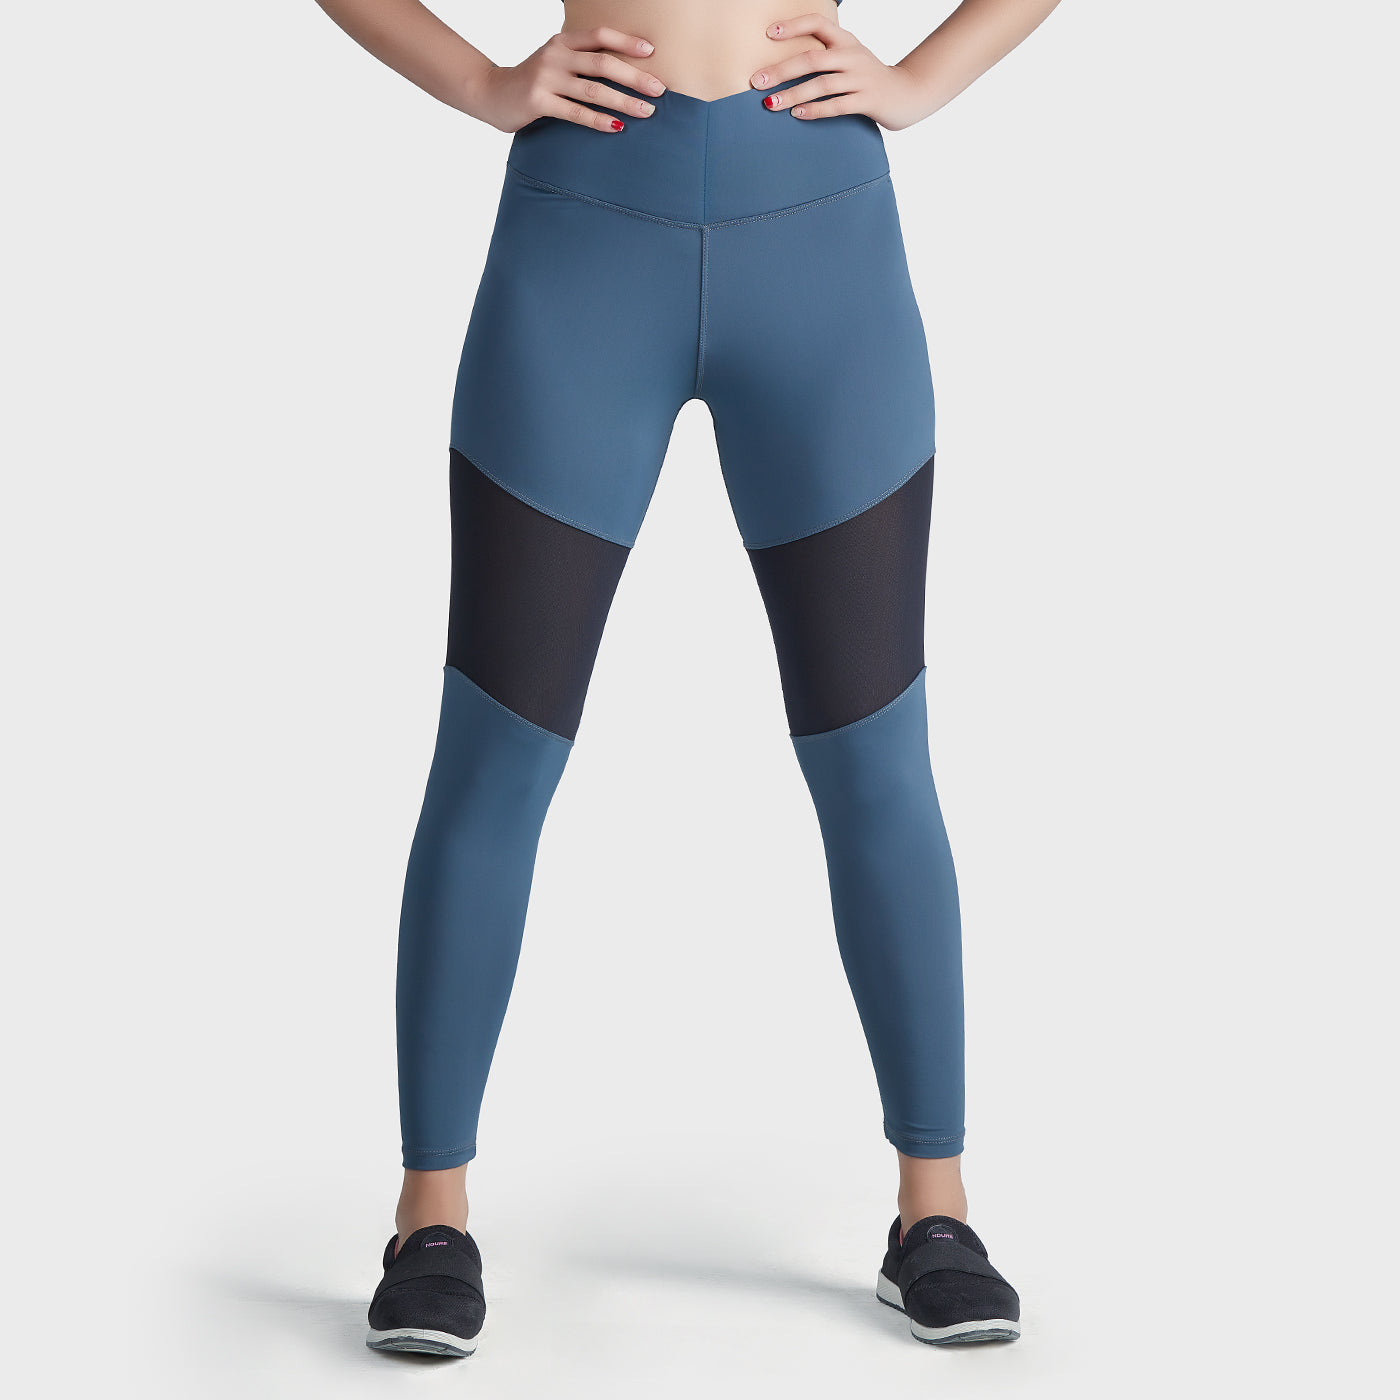 Yoga Tights By NDURE, Women Clothing, Active Wear